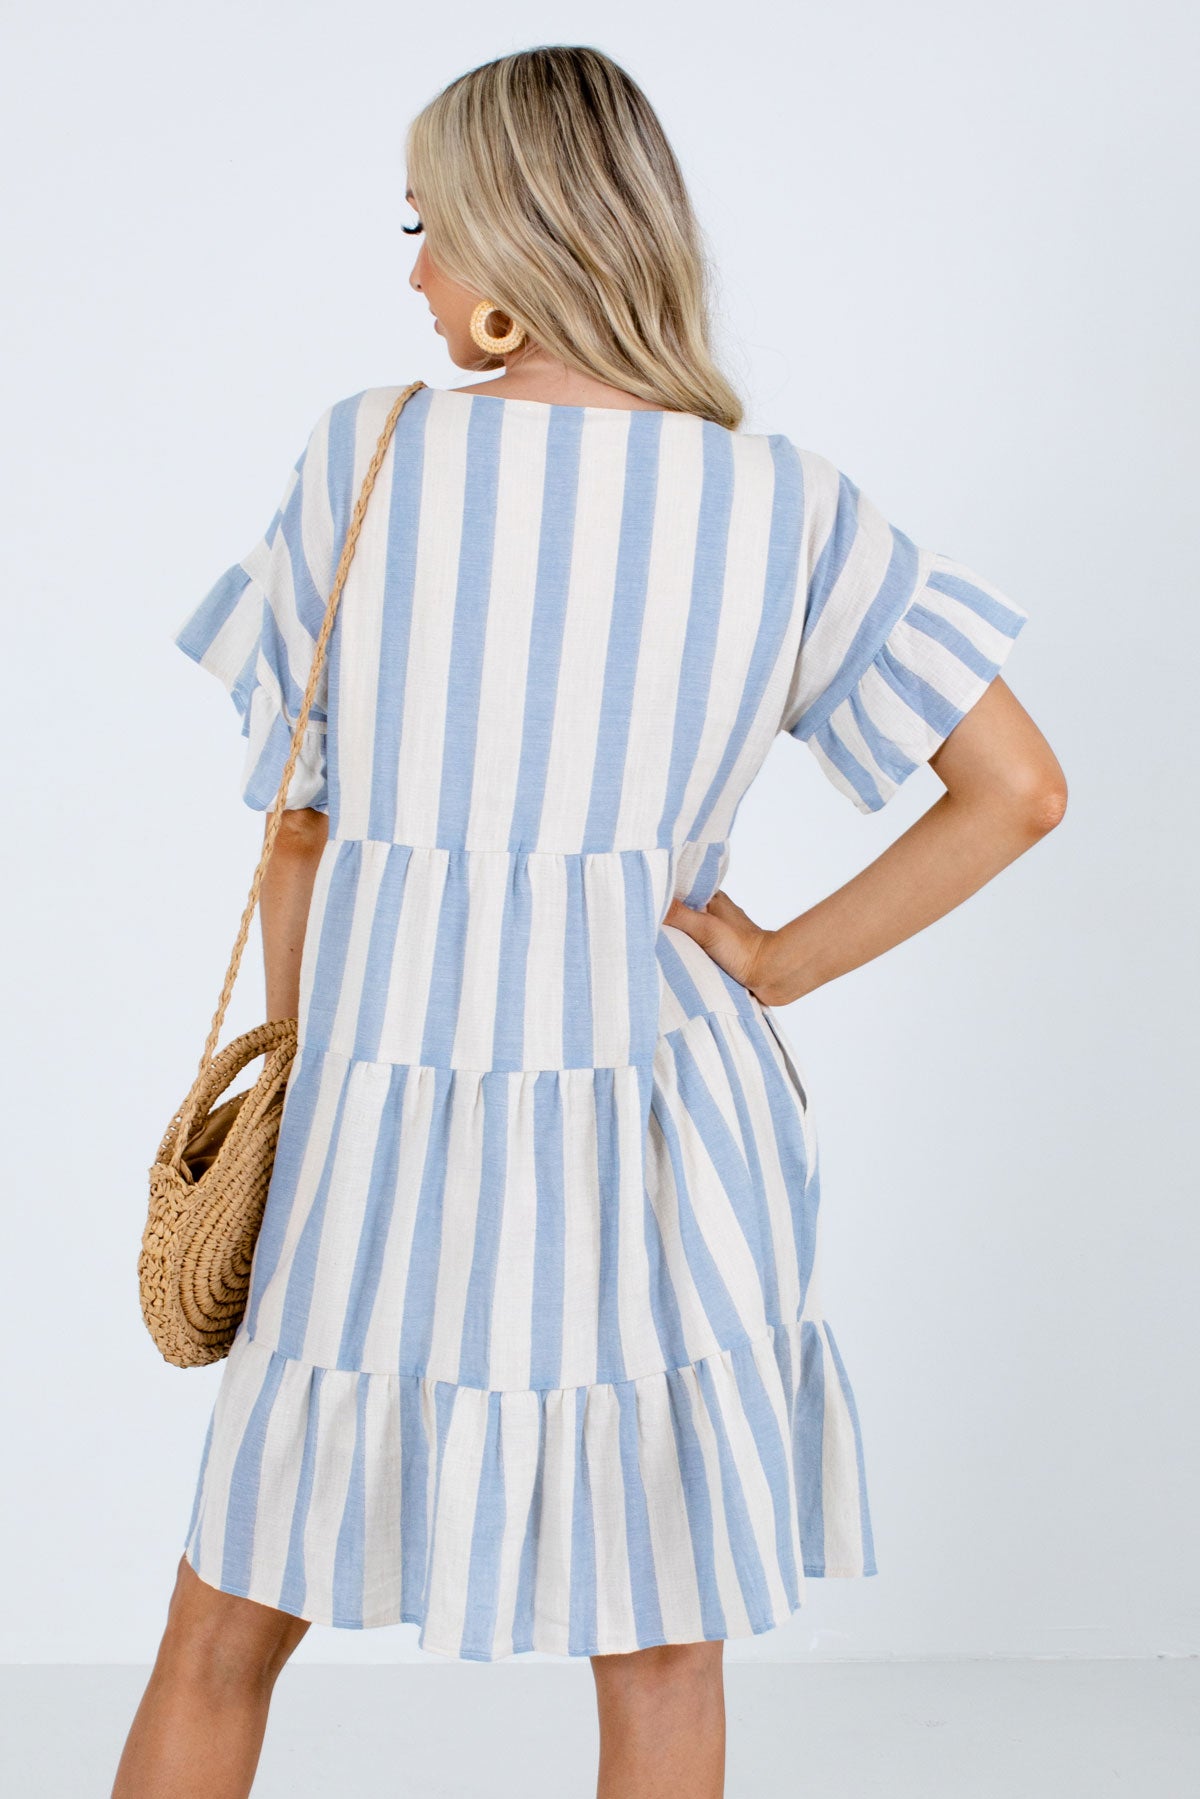 Tiered Skirt and Flutter Sleeve Mini Dress in White and Blue